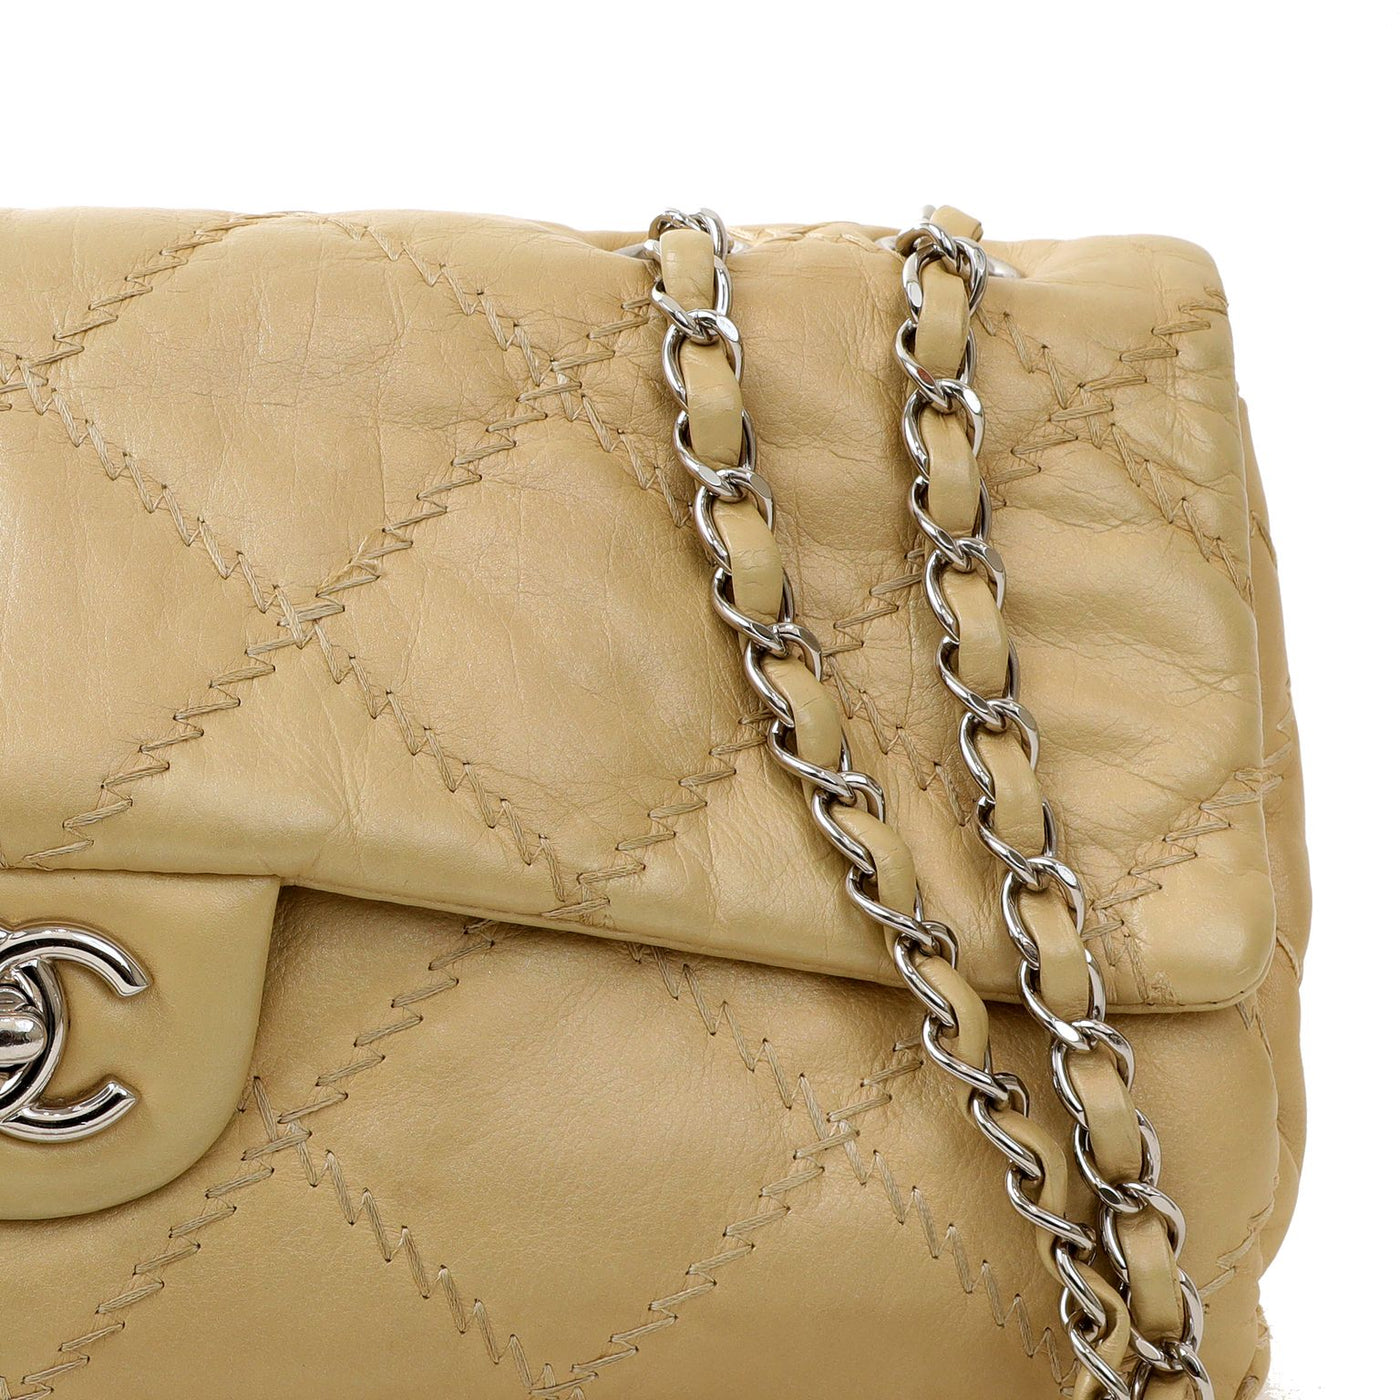 Chanel Champagne Gold East West Ultra Stitch Flap Bag w/ Gold Hardware